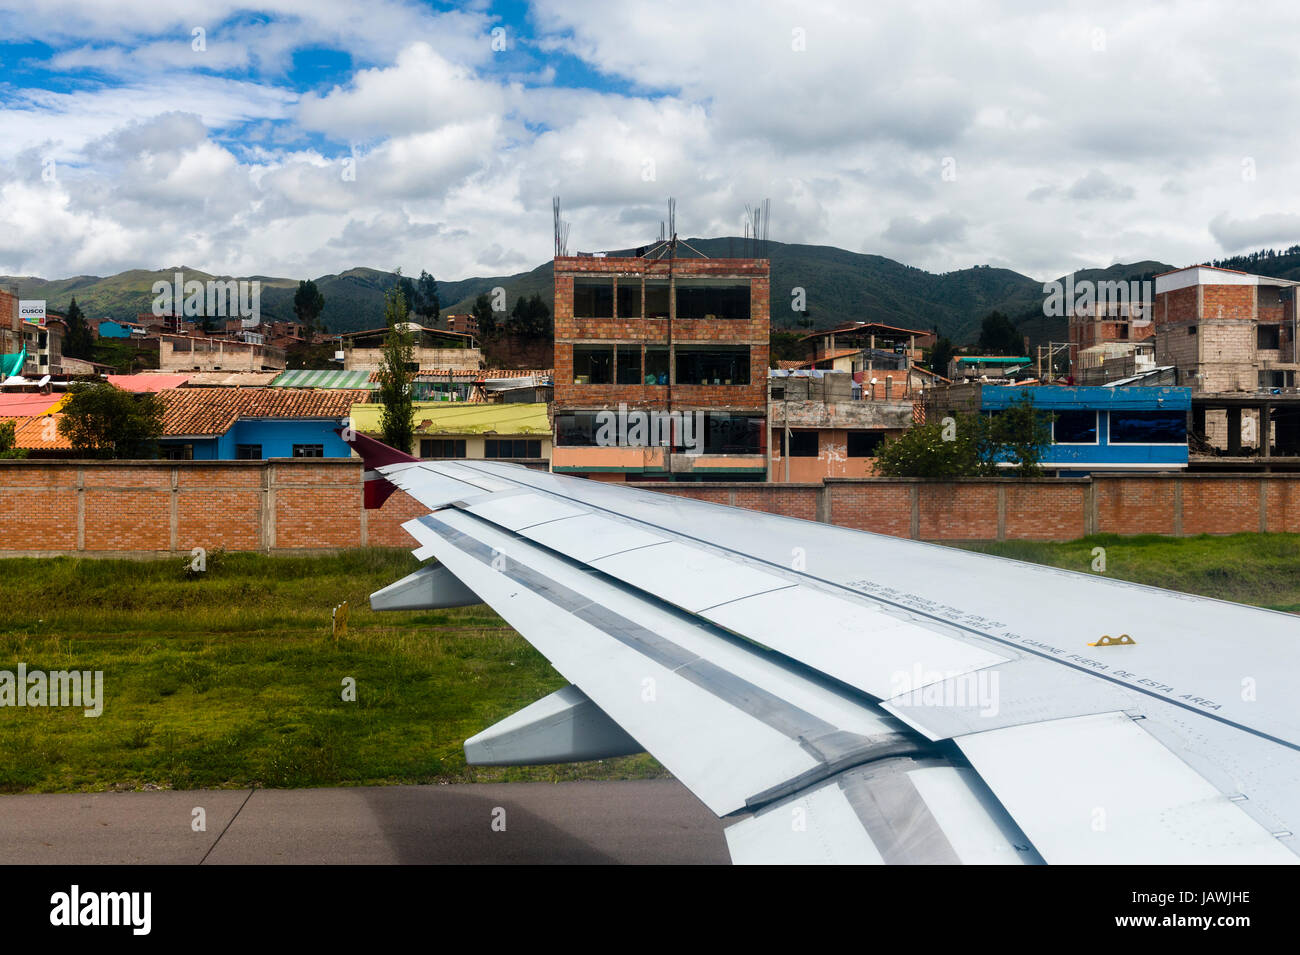 A plane wing taking off from an airport in the Andes mountains. Stock Photo